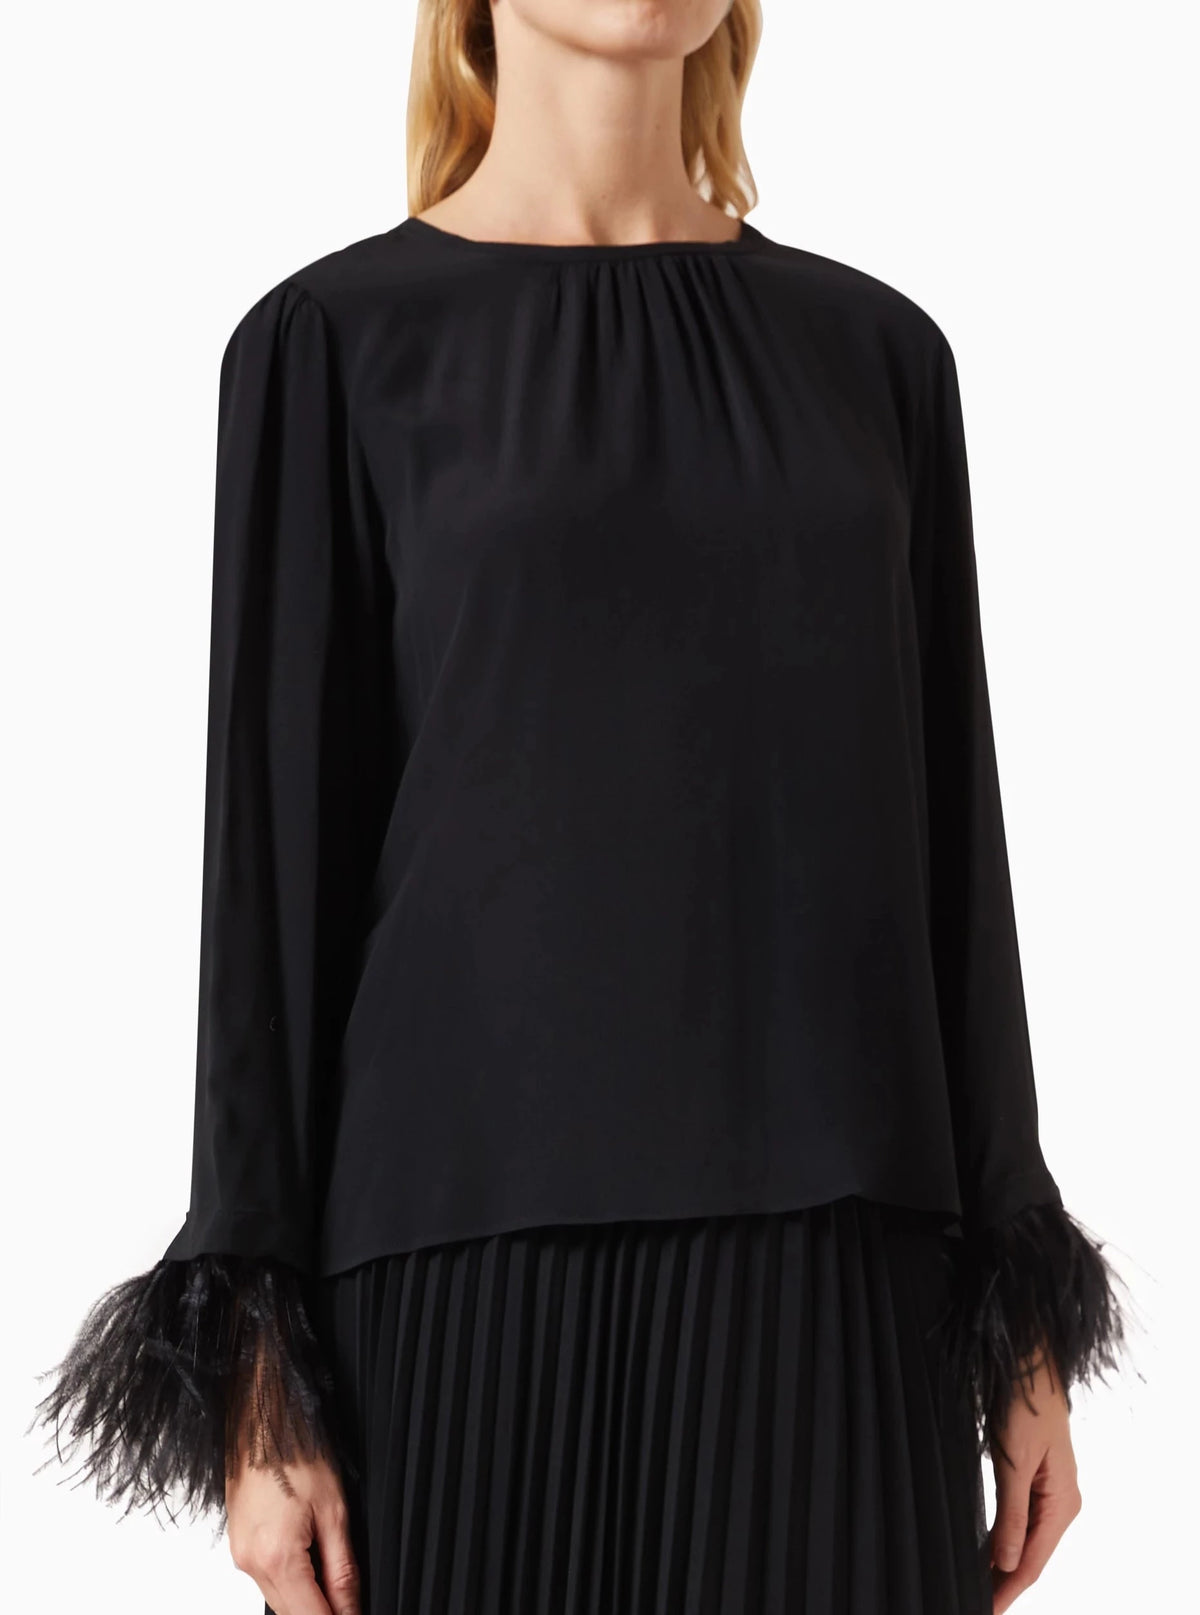 Marella Rivista Feather Top - Size 6 Available